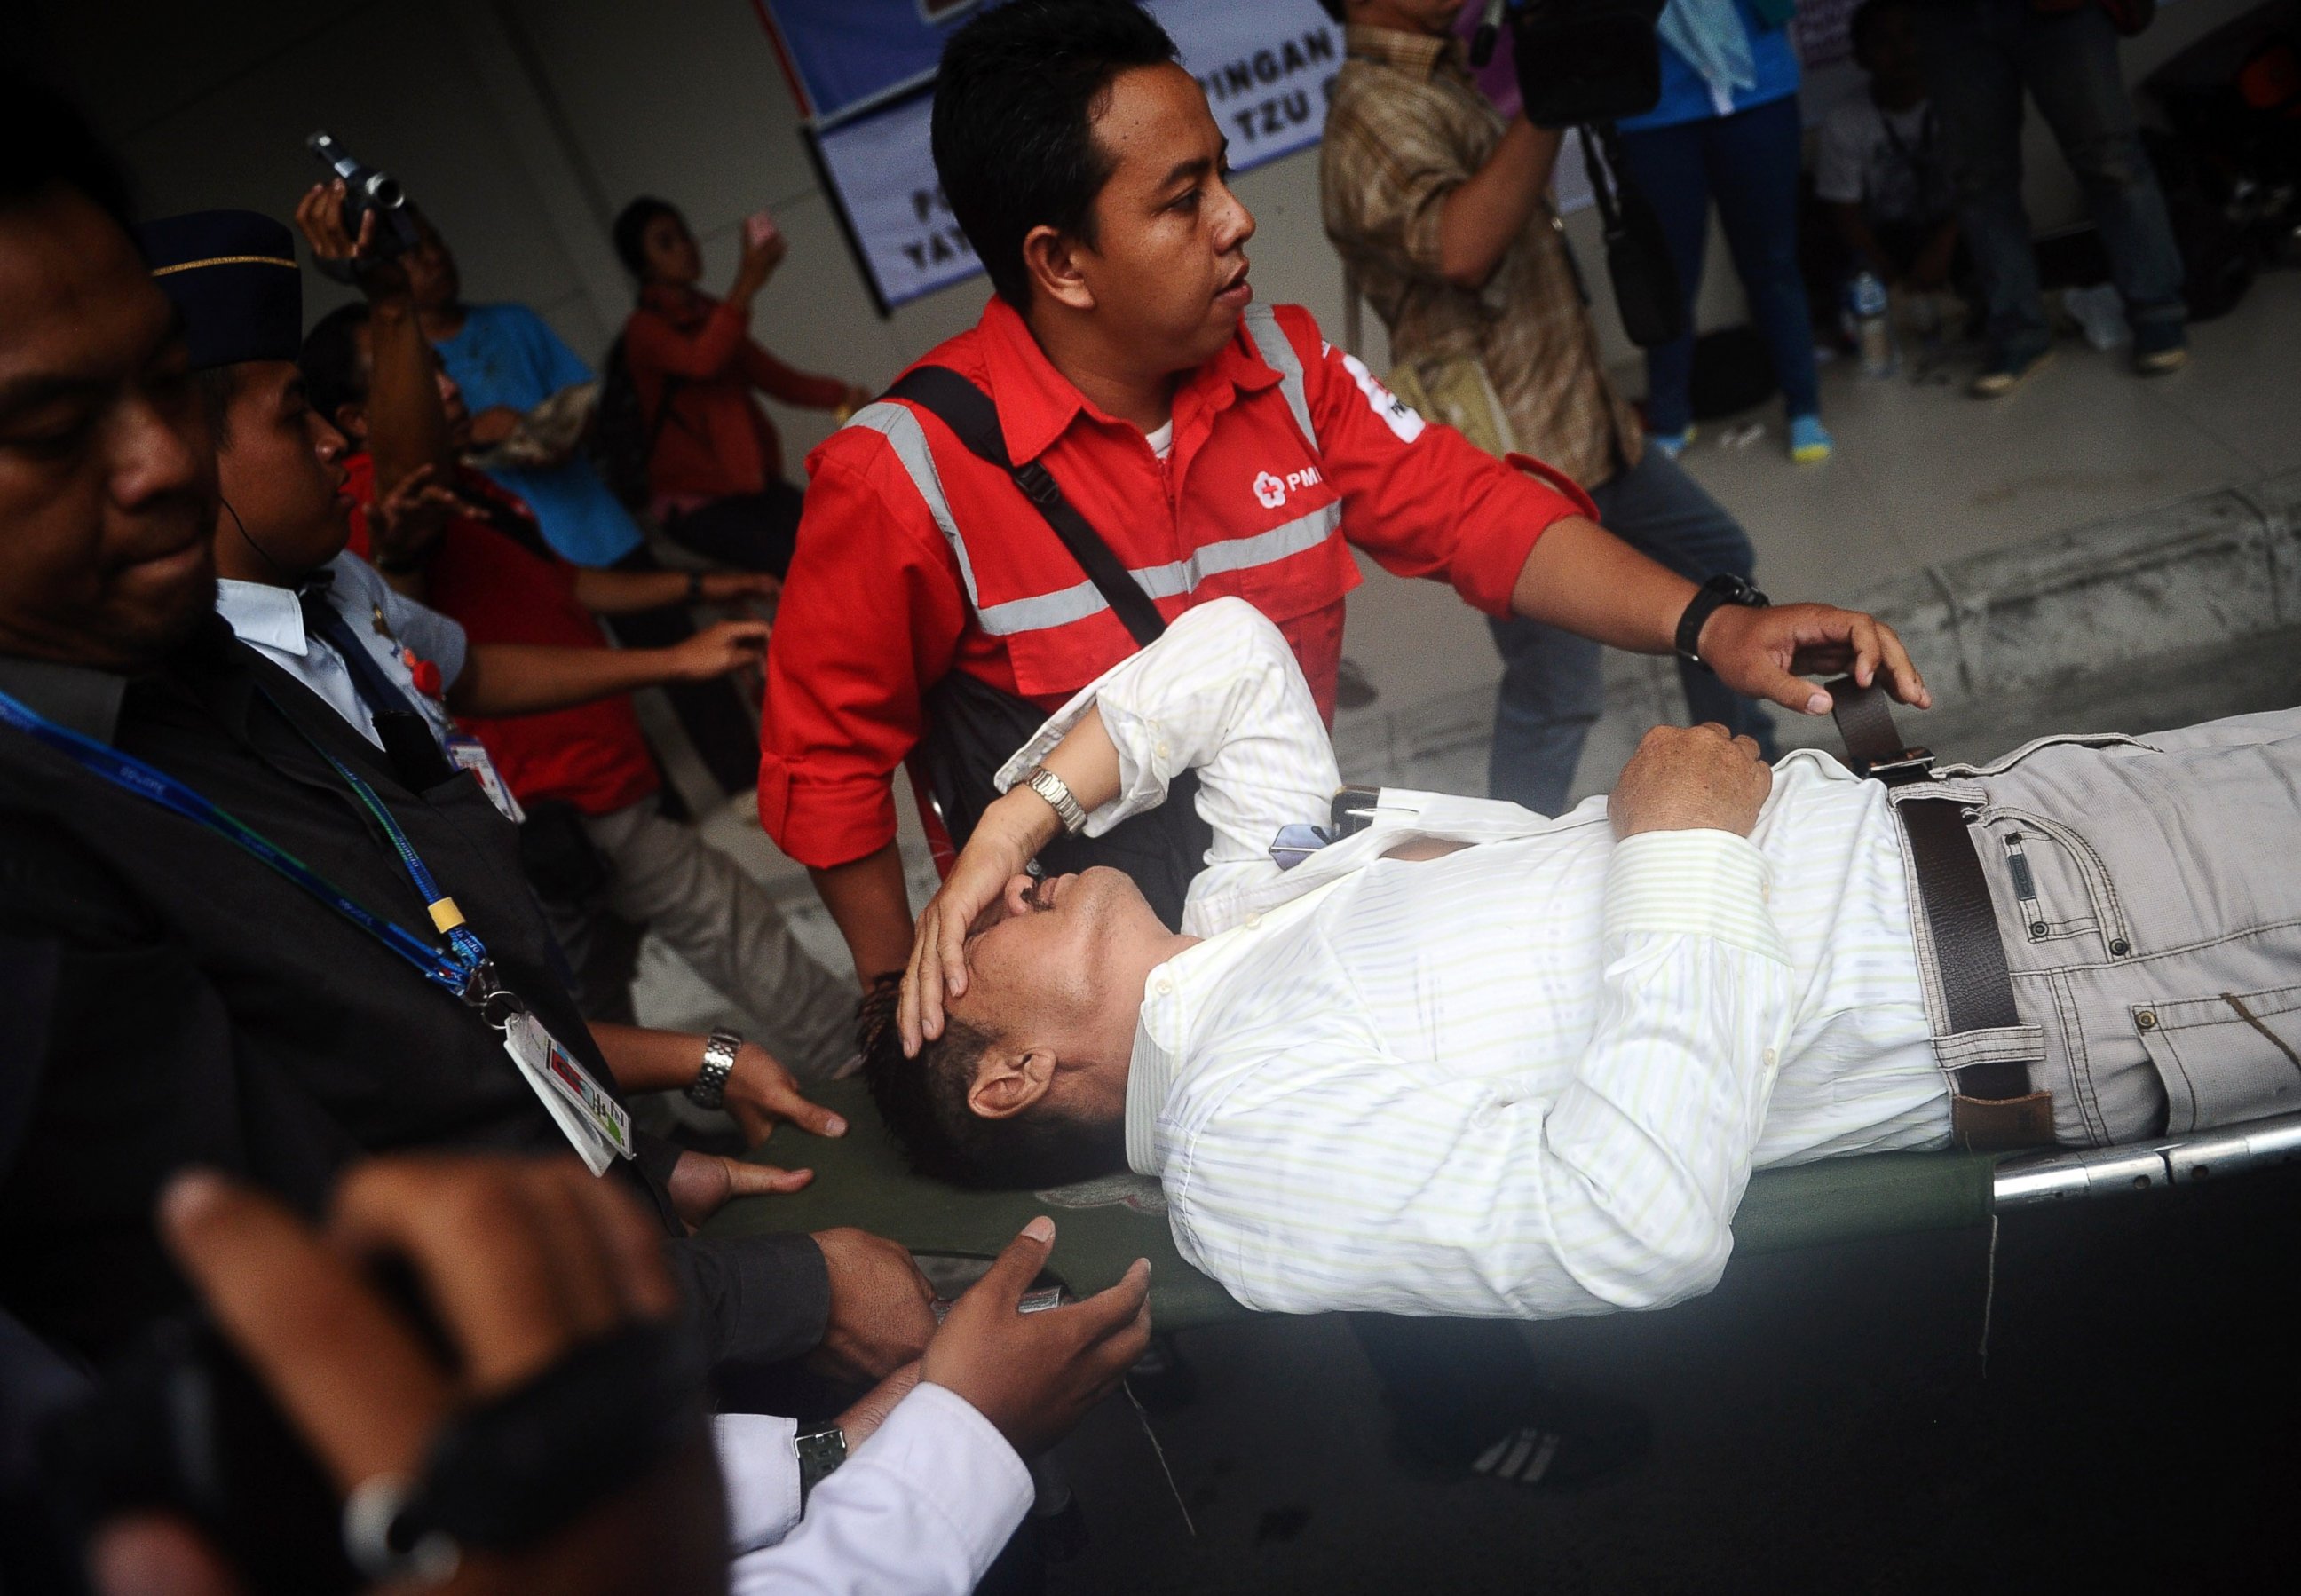 PHOTO: A relative of passengers on AirAsia flight QZ 8501 receives medical attention as he collapses at the breaking news of debris and bodies being found on Dec. 30, 2014 in Surabaya, Indonesia. 